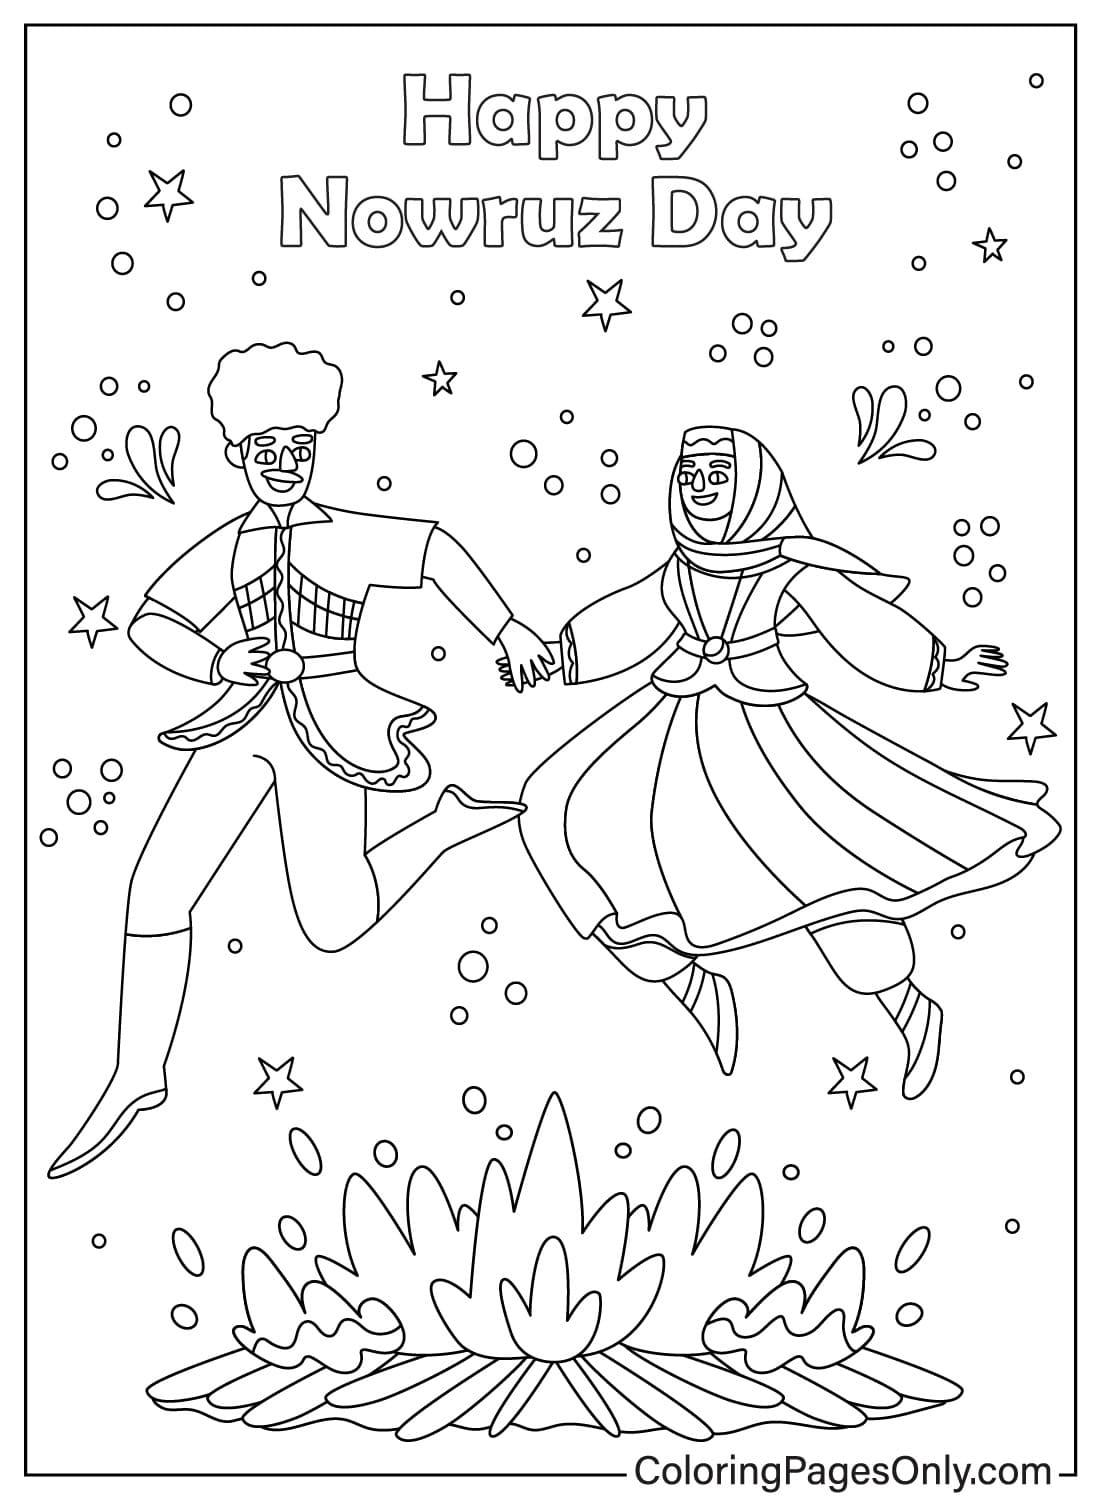 Happy Nowruz Day Coloring Page from International Nowruz Day